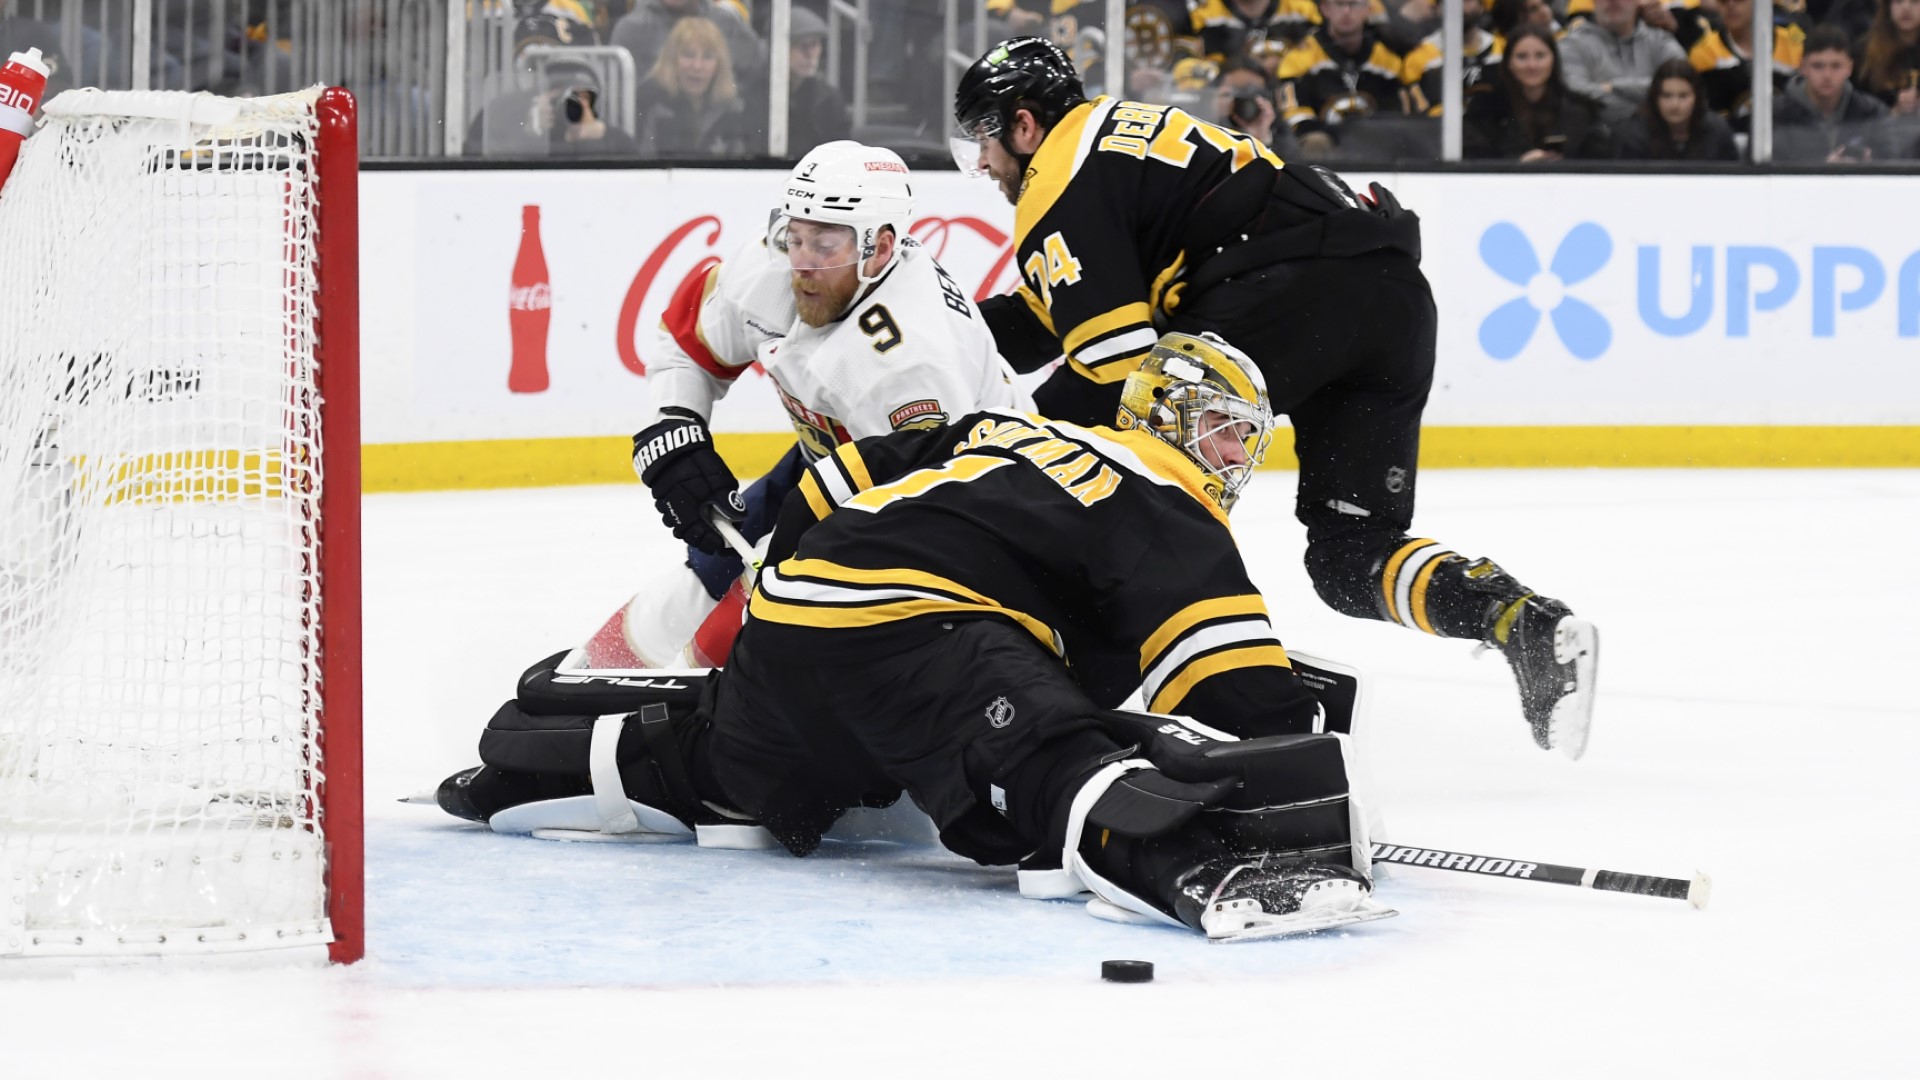 Since 2011 Stanley Cup, Bruins Have Struggled In Game 7's